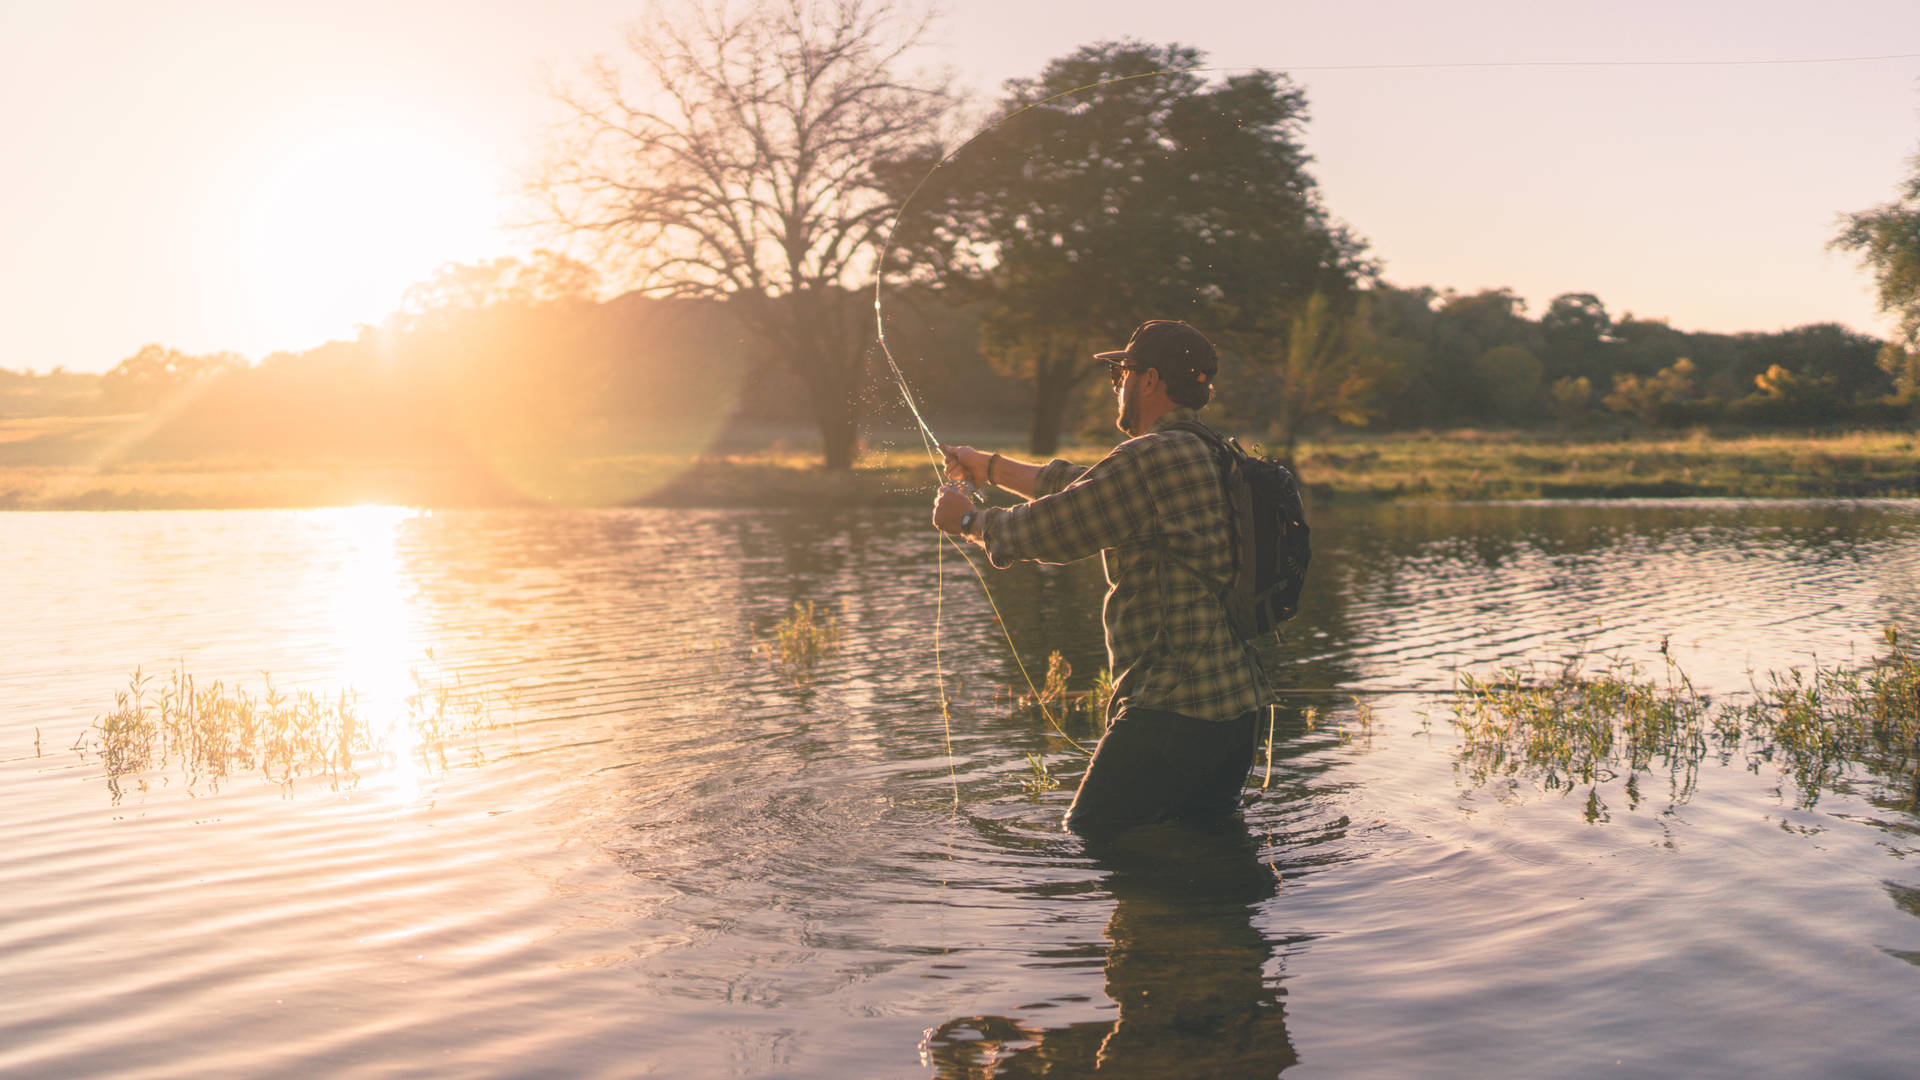 Fishing 7916X4452 Wallpaper and Background Image